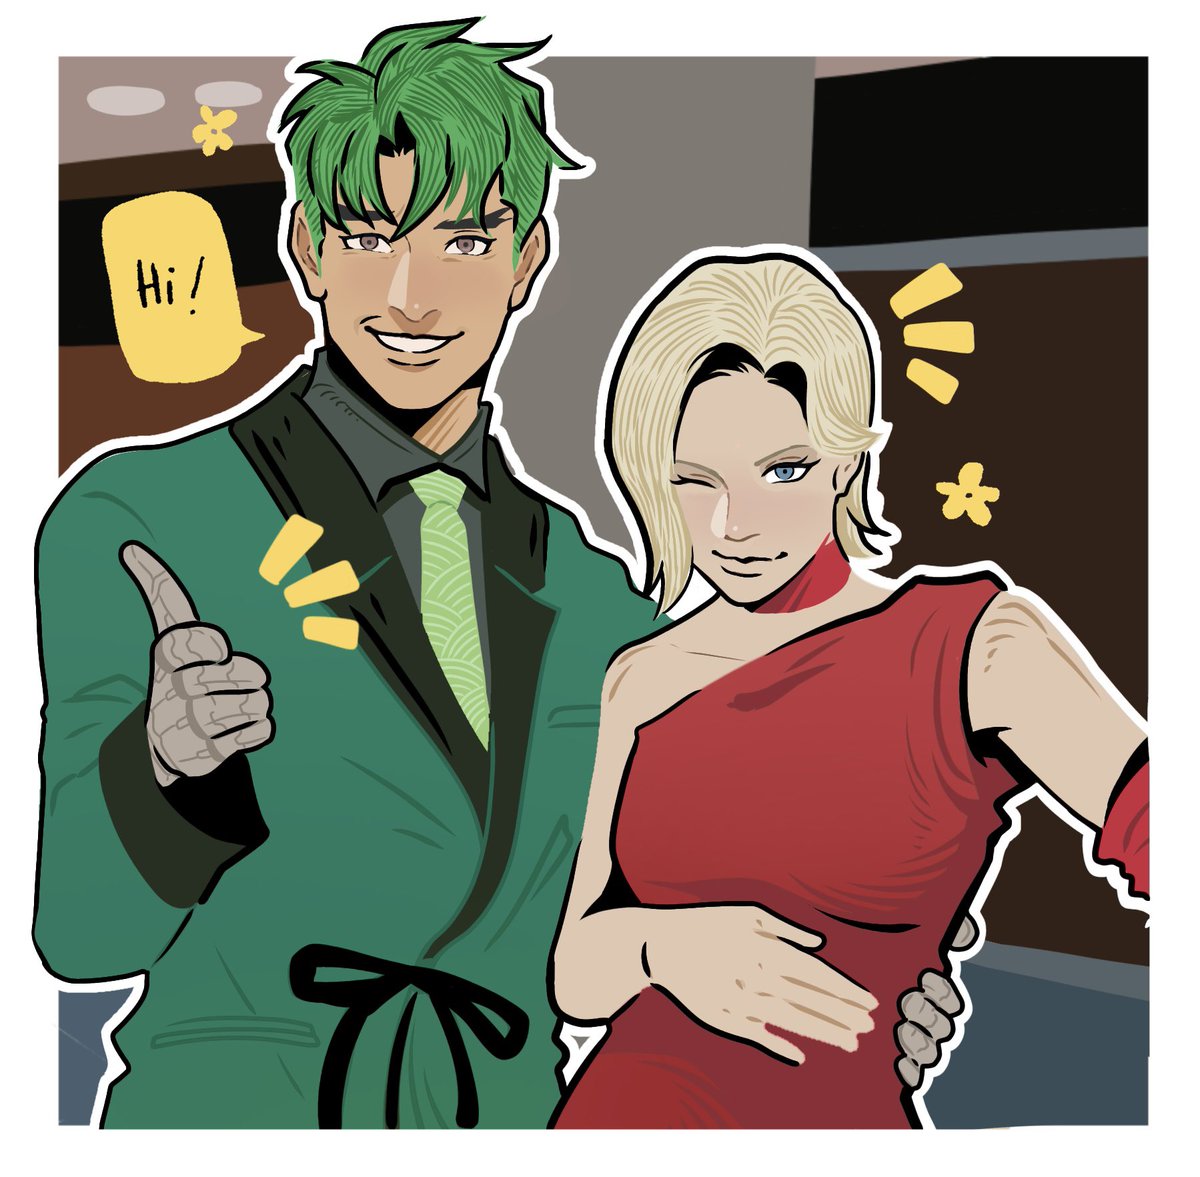 Gonna leave this here #Genji #Mercy #Gency #Overwatch2